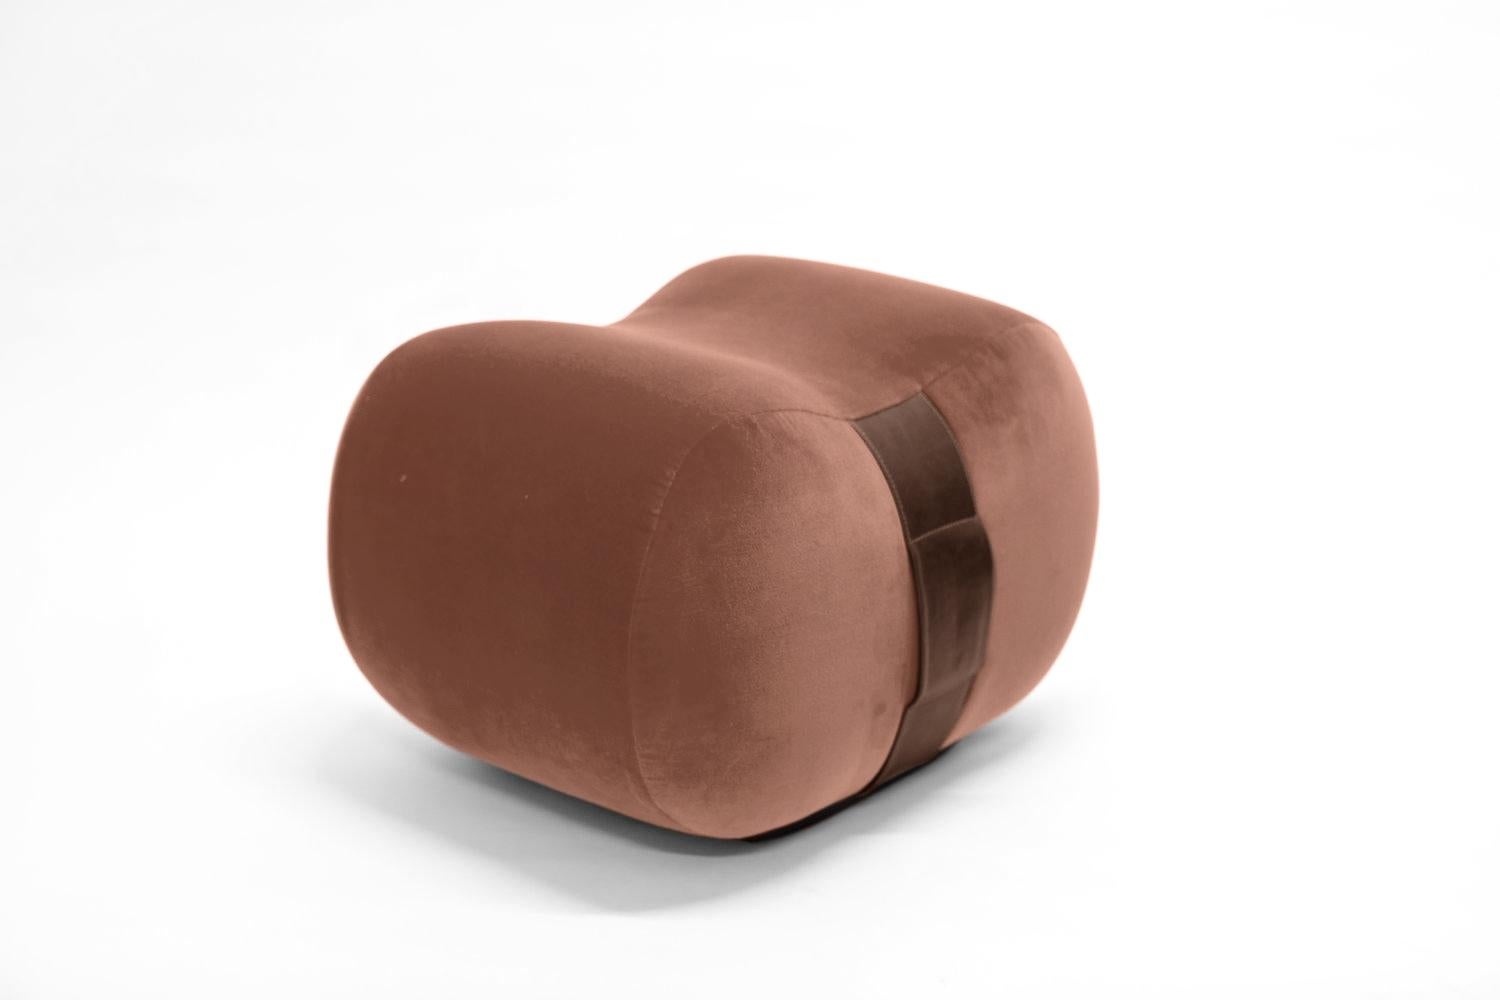 The Milo Bean, you can sit on it, lean against it, and carry it. This fun, colorful, curvy design by Marie Burgos may be the ultimate in portable seating. Crafted in plush fabrics with leather accent handles The Milo Bean offers style, convenience